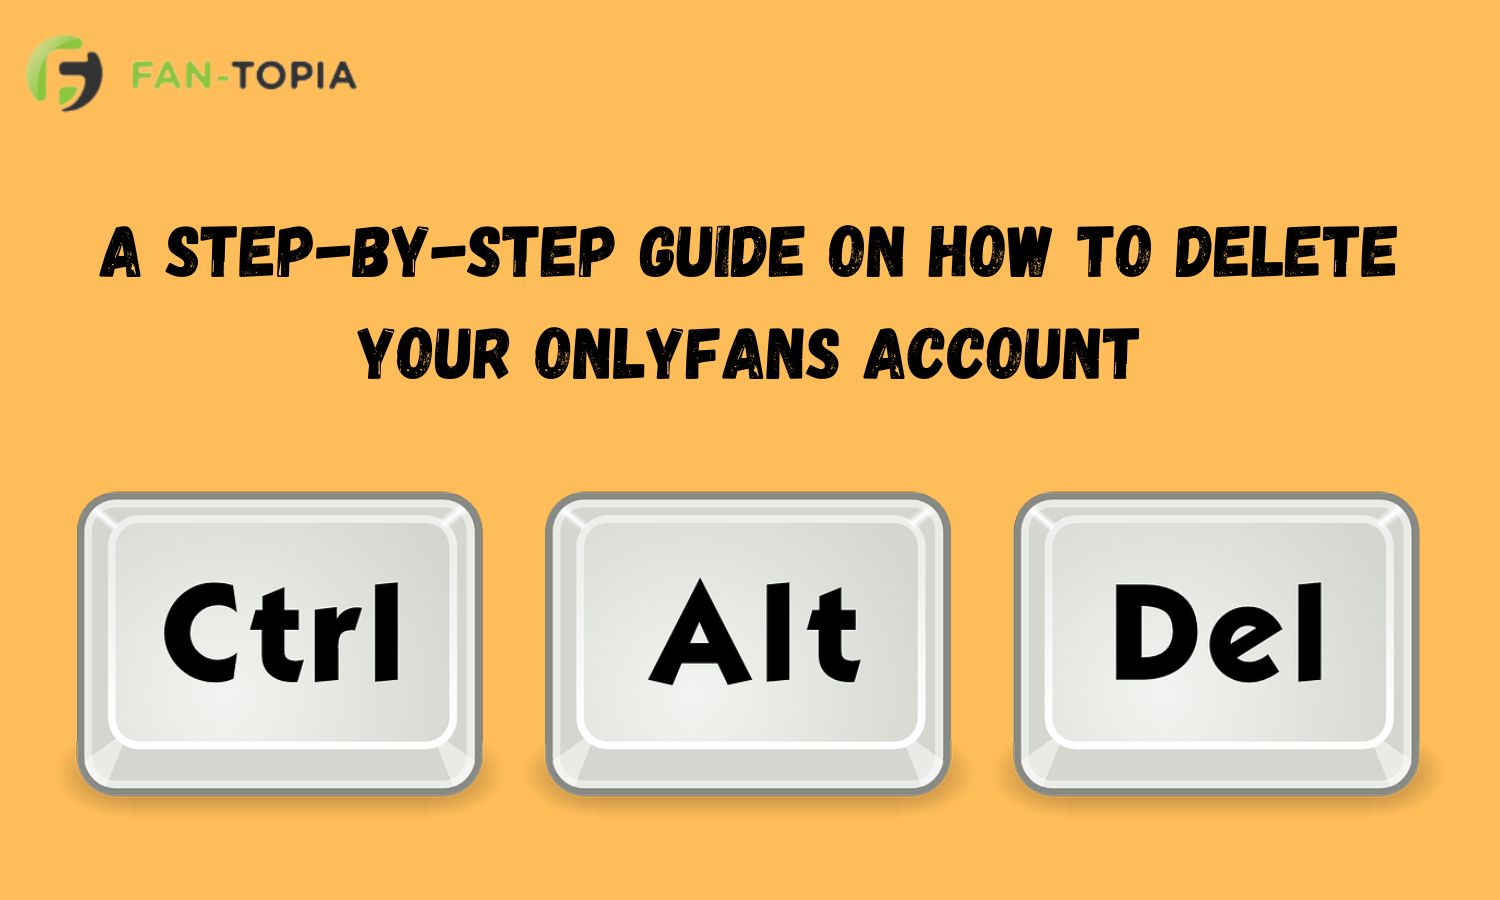 A Step-by-Step Guide on How to Delete Your OnlyFans Account